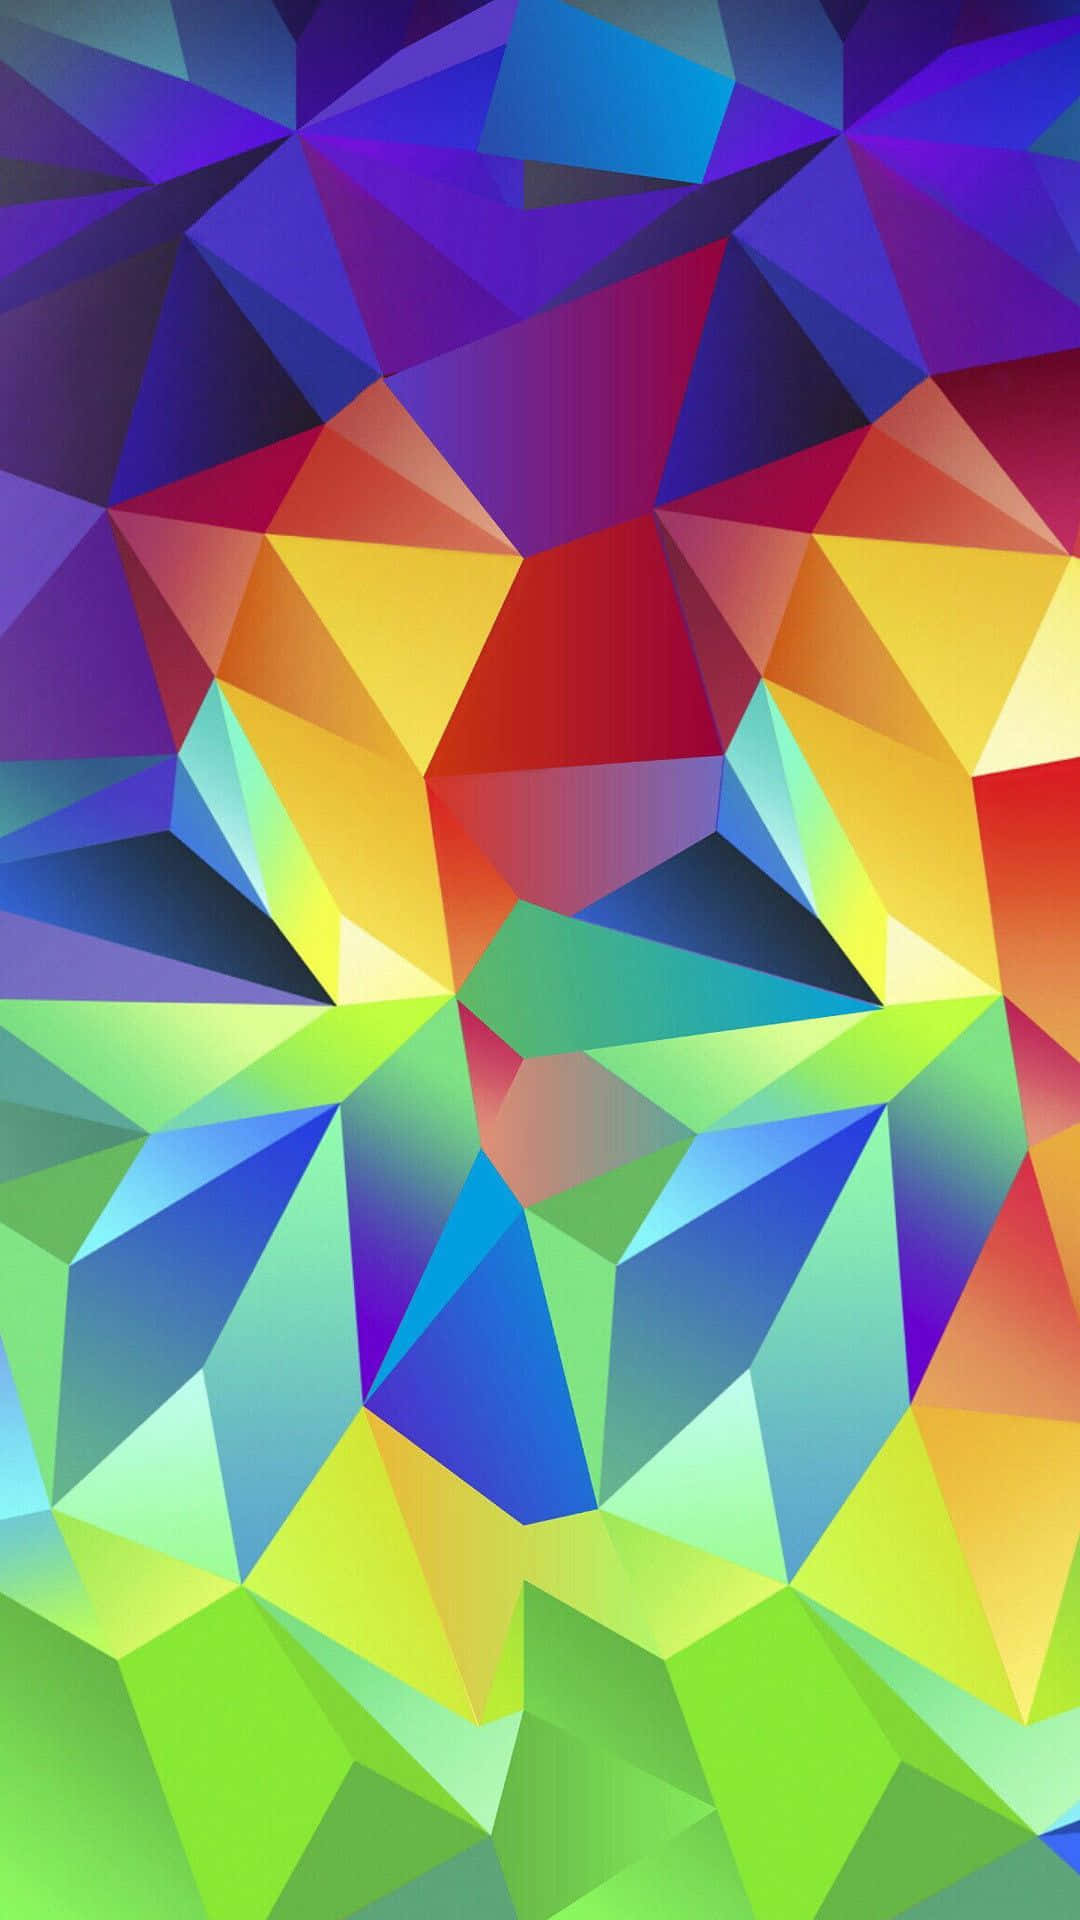 A Colorful Abstract Background With Triangles